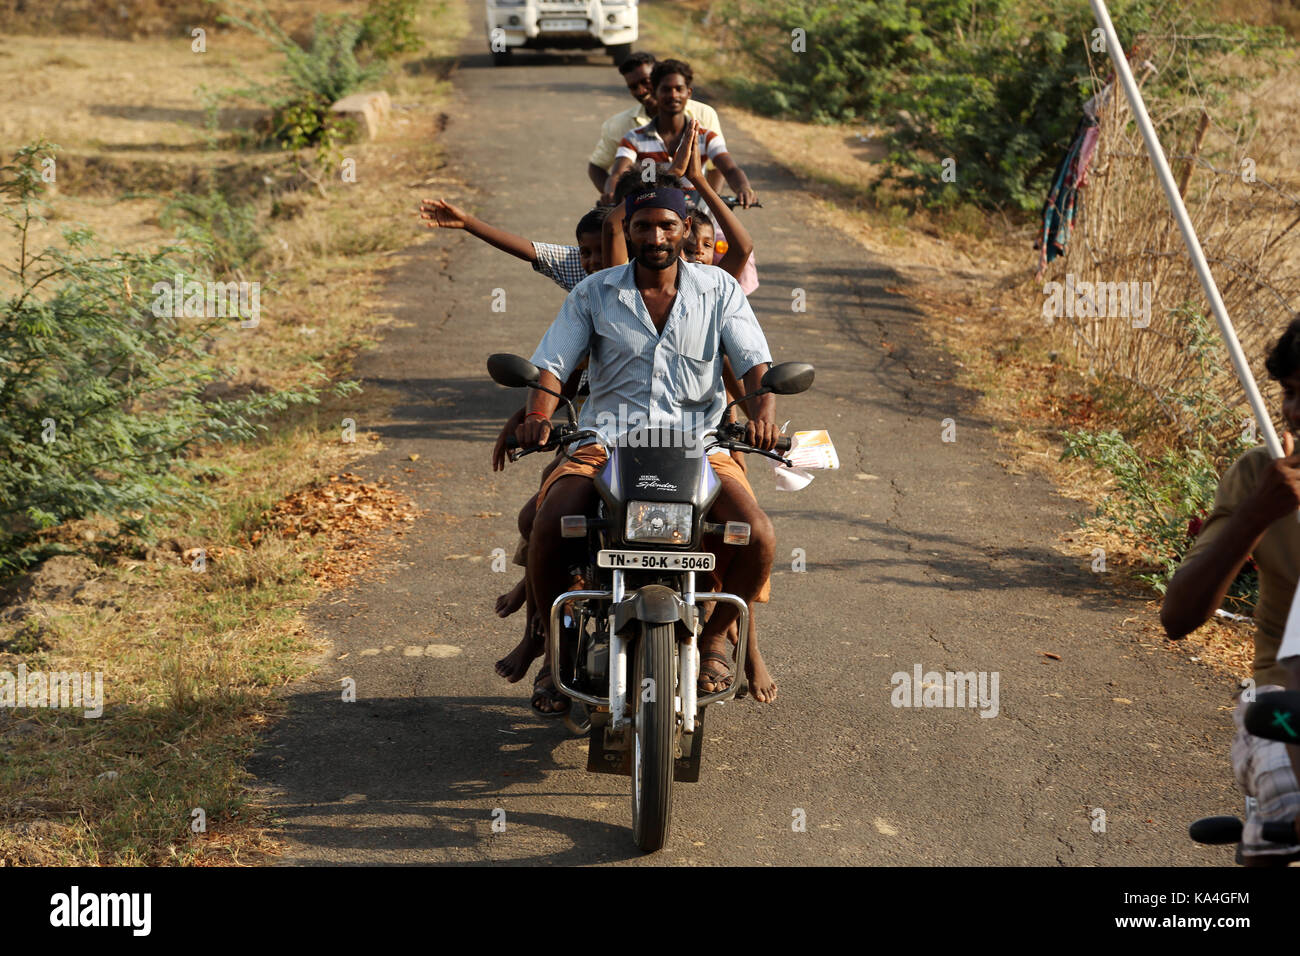 Indian family rides a motorbike Stock Photo